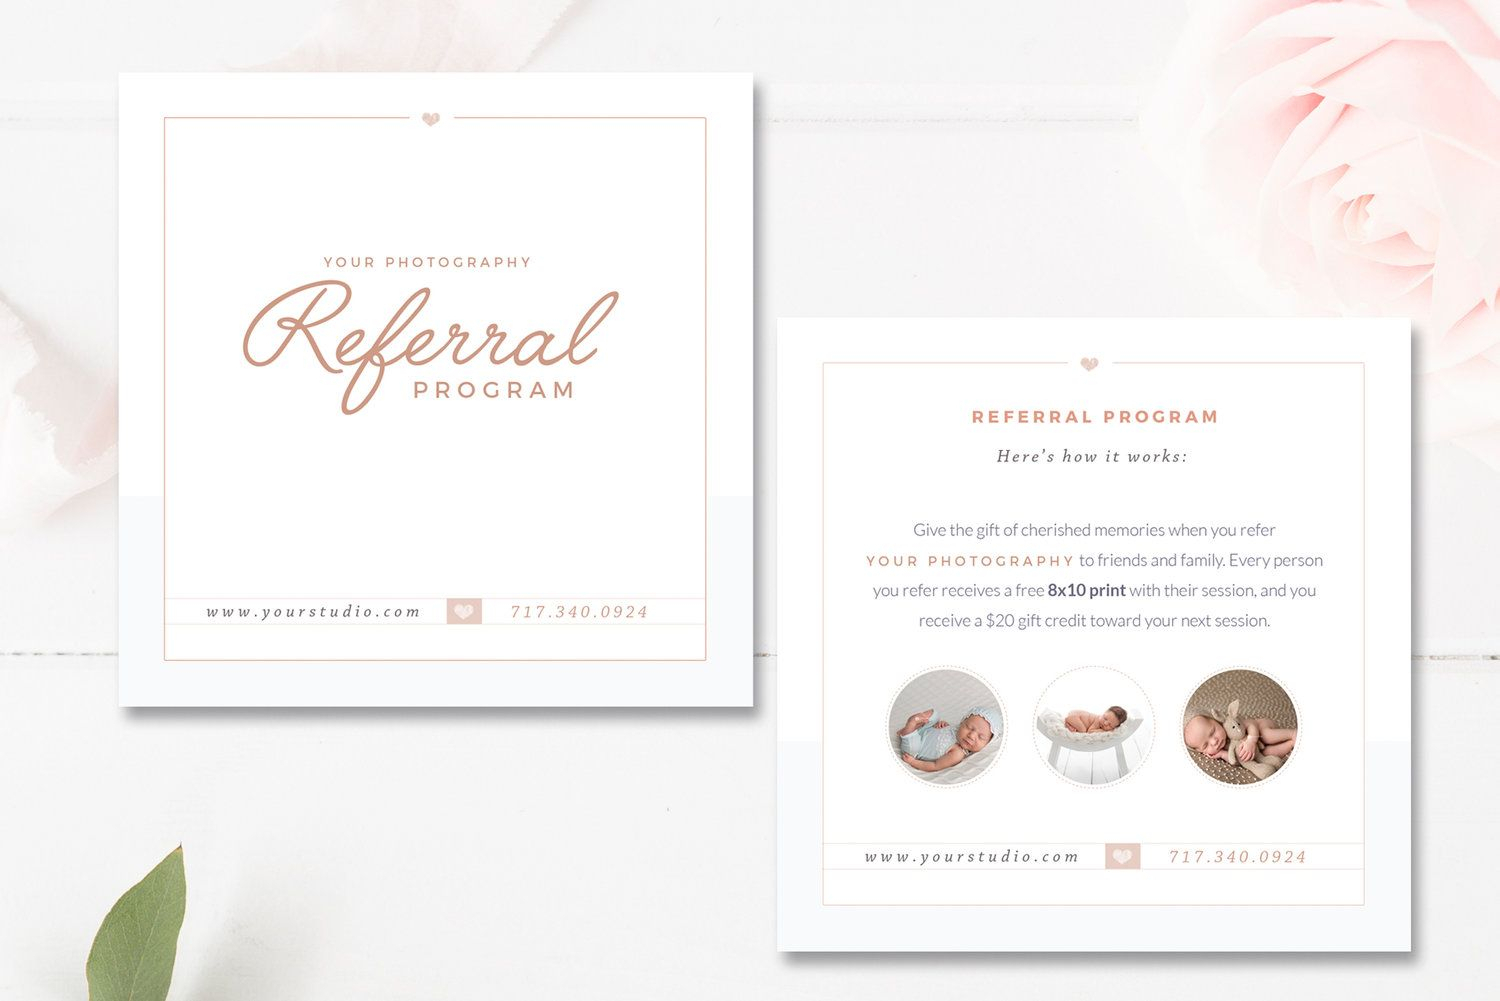 Photography Referral Card Templates, Referral Program Regarding Photography Referral Card Templates